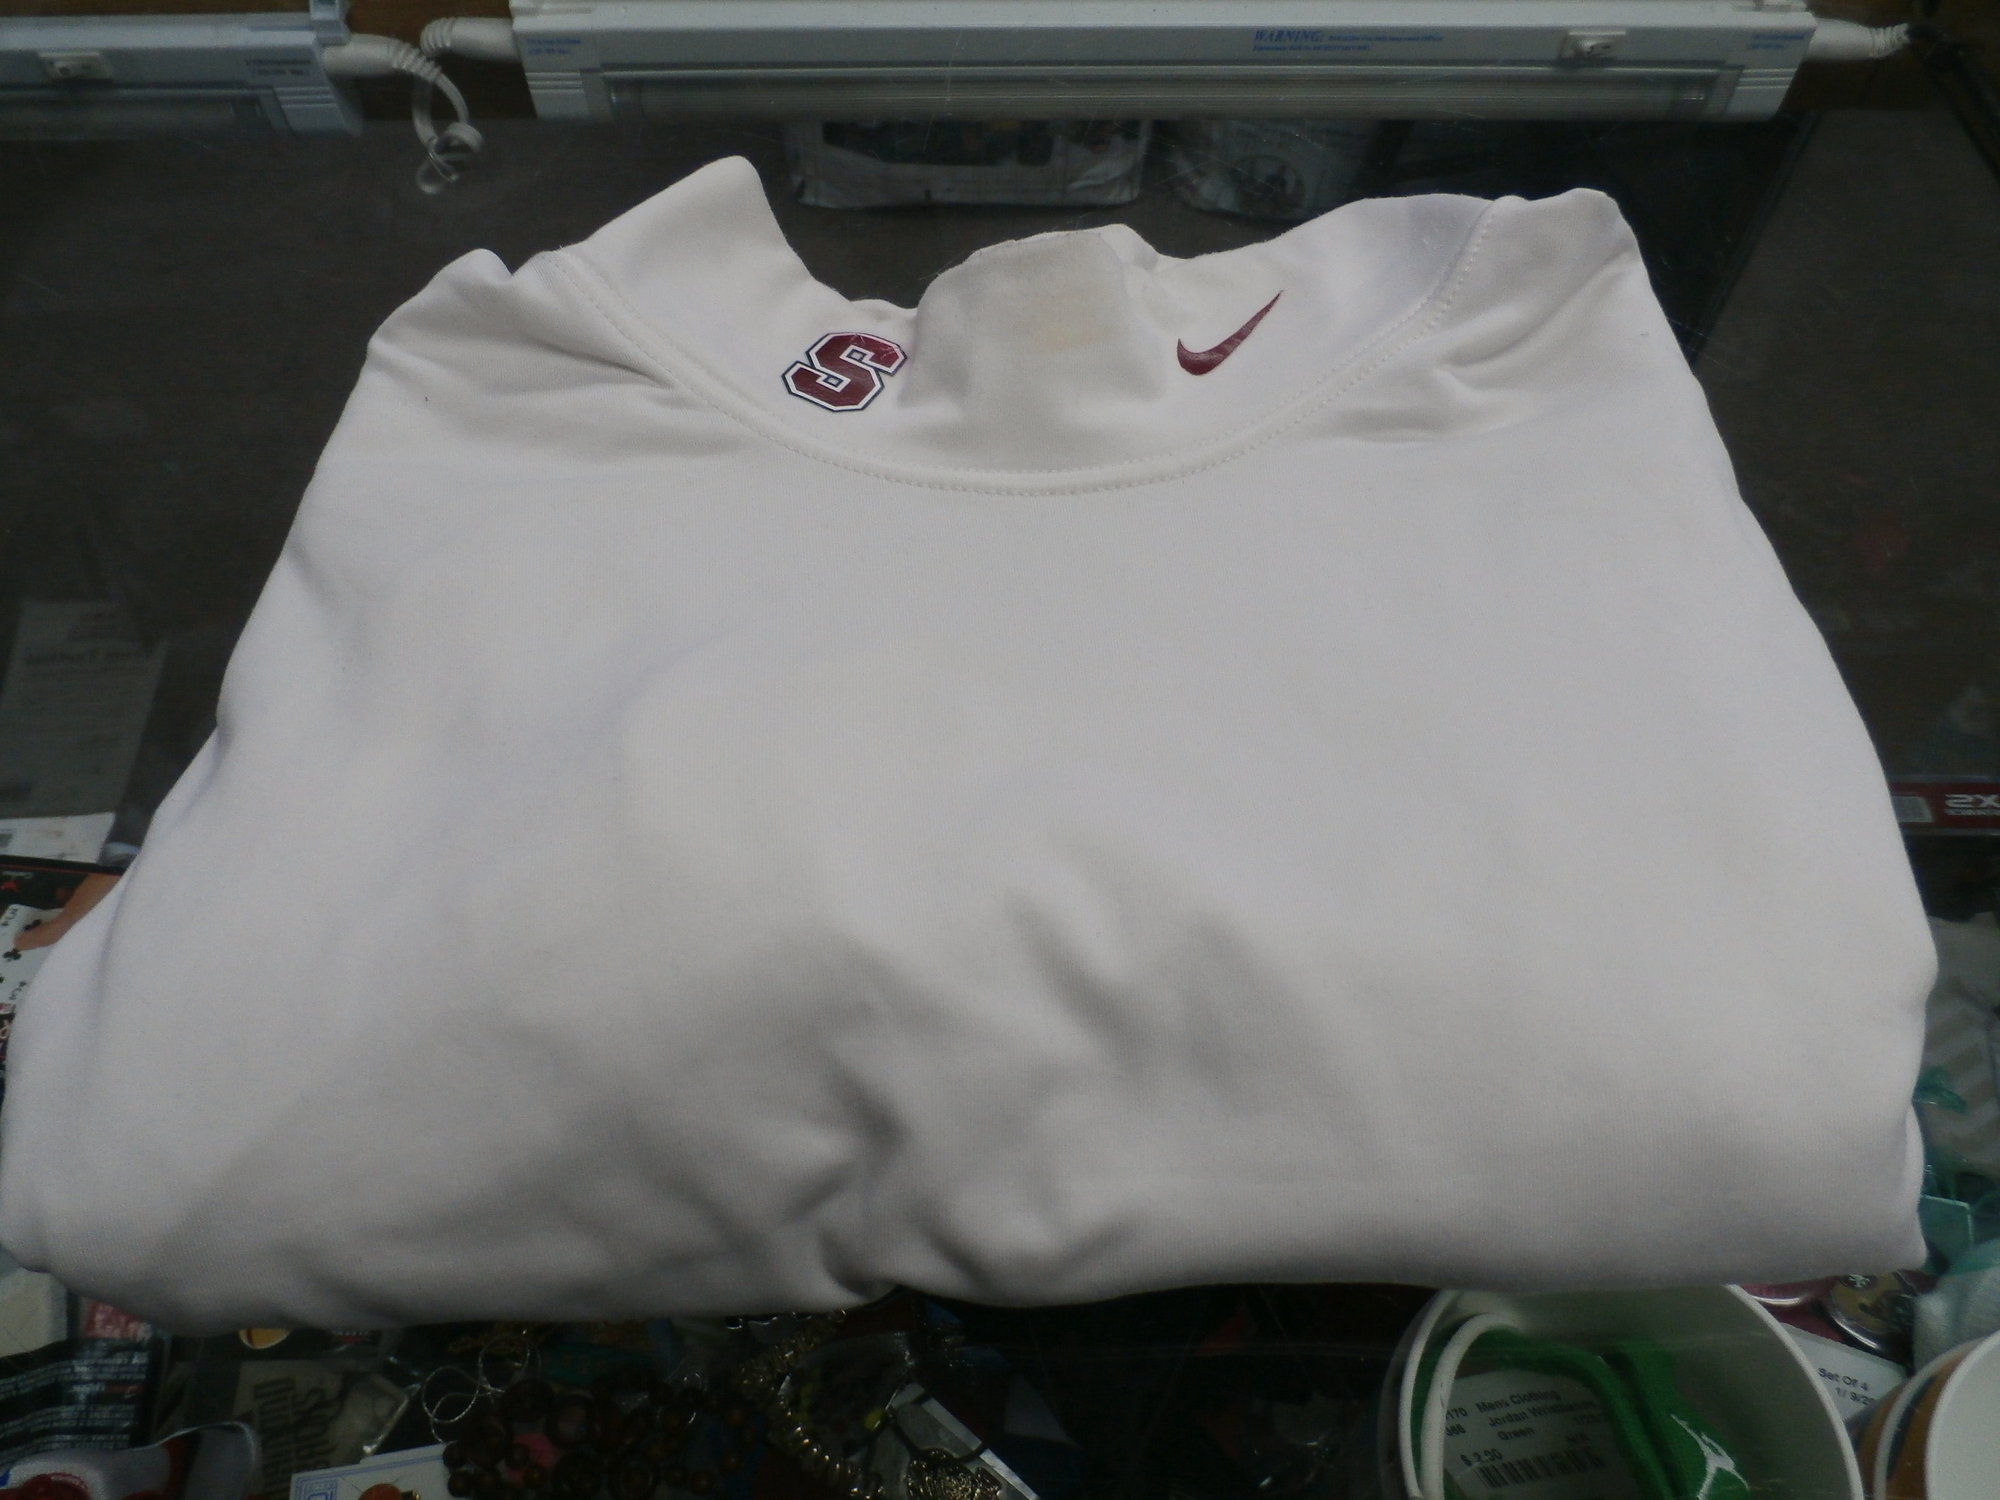 Stanford LS Shirt, White, Size: XL
Nike Men's Stanford Cardinal long sleeve shirt white size XL 28711
Rating: (see below) 4- Fair Condition
Team: Stanford Cardinal
Player: N/A
Brand: Nike
Size:  Men's XL  (Measured Flat: Across chest 19\"; Length 28\")
Measured Laying Flat: armpit to armpit; top of shoulder to bottom hem
Color: White
Style: Long sleeve shirt; Screen pressed
Material: 100% Polyester
Condition: 4- Fair Condition: wrinkled; pilling and fuzz; discoloration from use; some light staining on front and sleeves; staining on collar;
Item #: 28711
Shipping: FREE